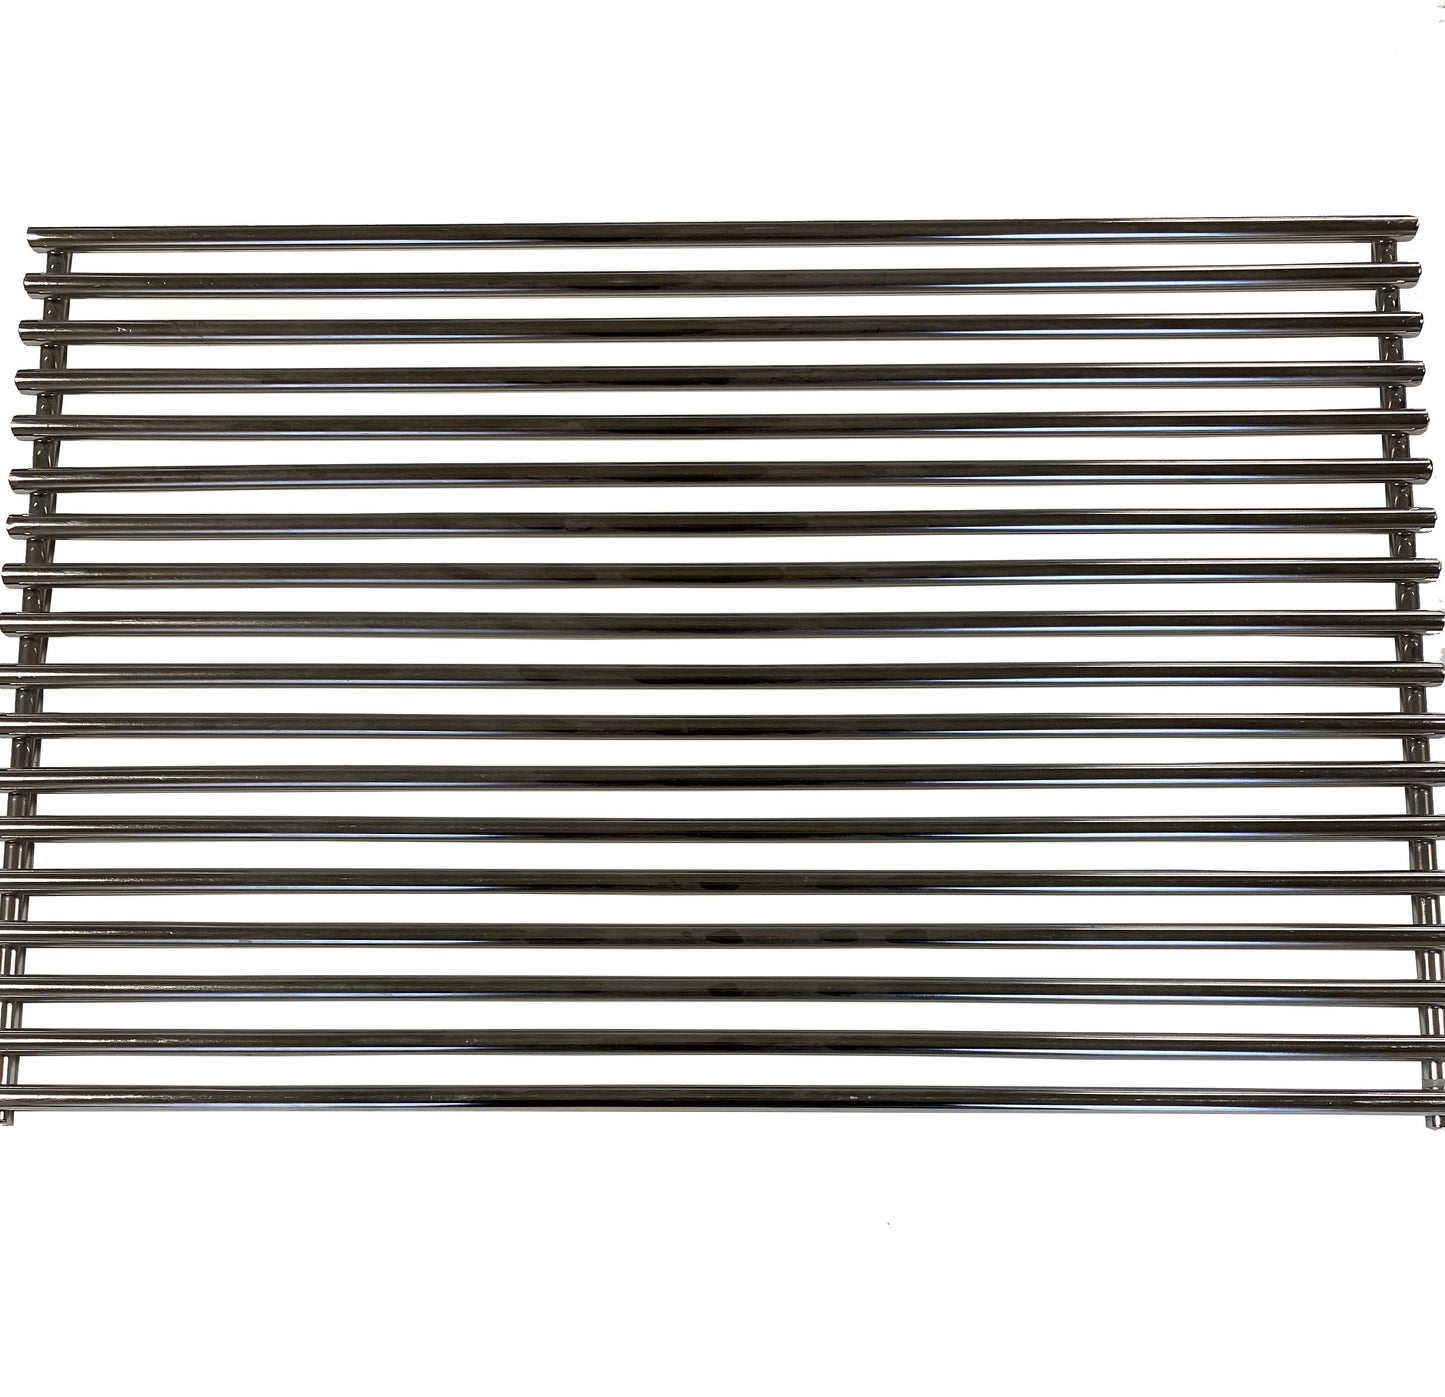 Broil King 22022284 regal stainless steel grid. Grill grates are one of the most versatile and used pieces of the BBQ. Adding flavor, sear marks and so much more. Replace those old rusted or cracked grills before your next grilling party. Available at Barbecues Galore.